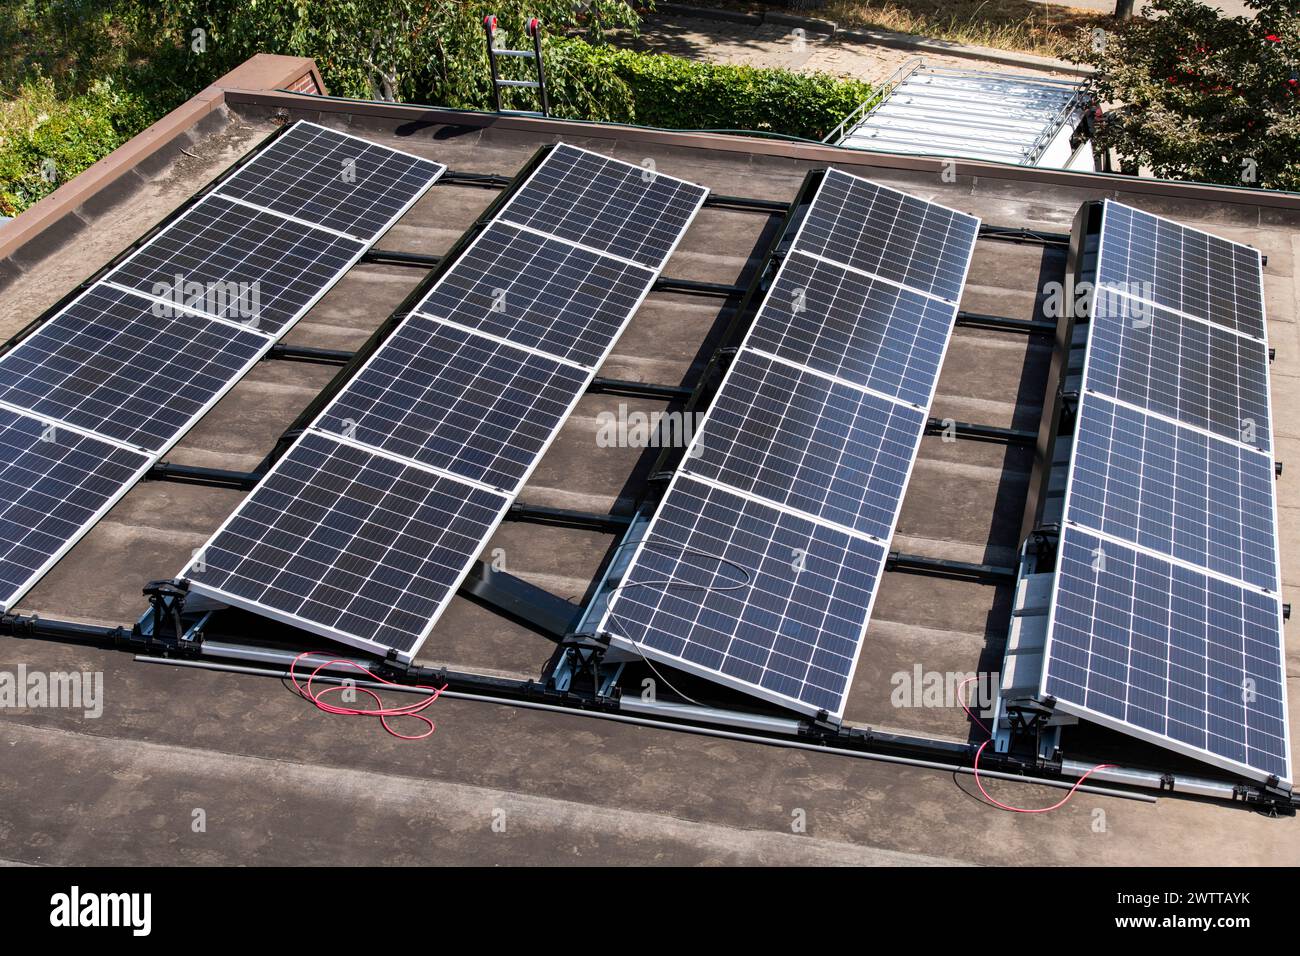 Solar panels soaking up the sun on a rooftop Stock Photo